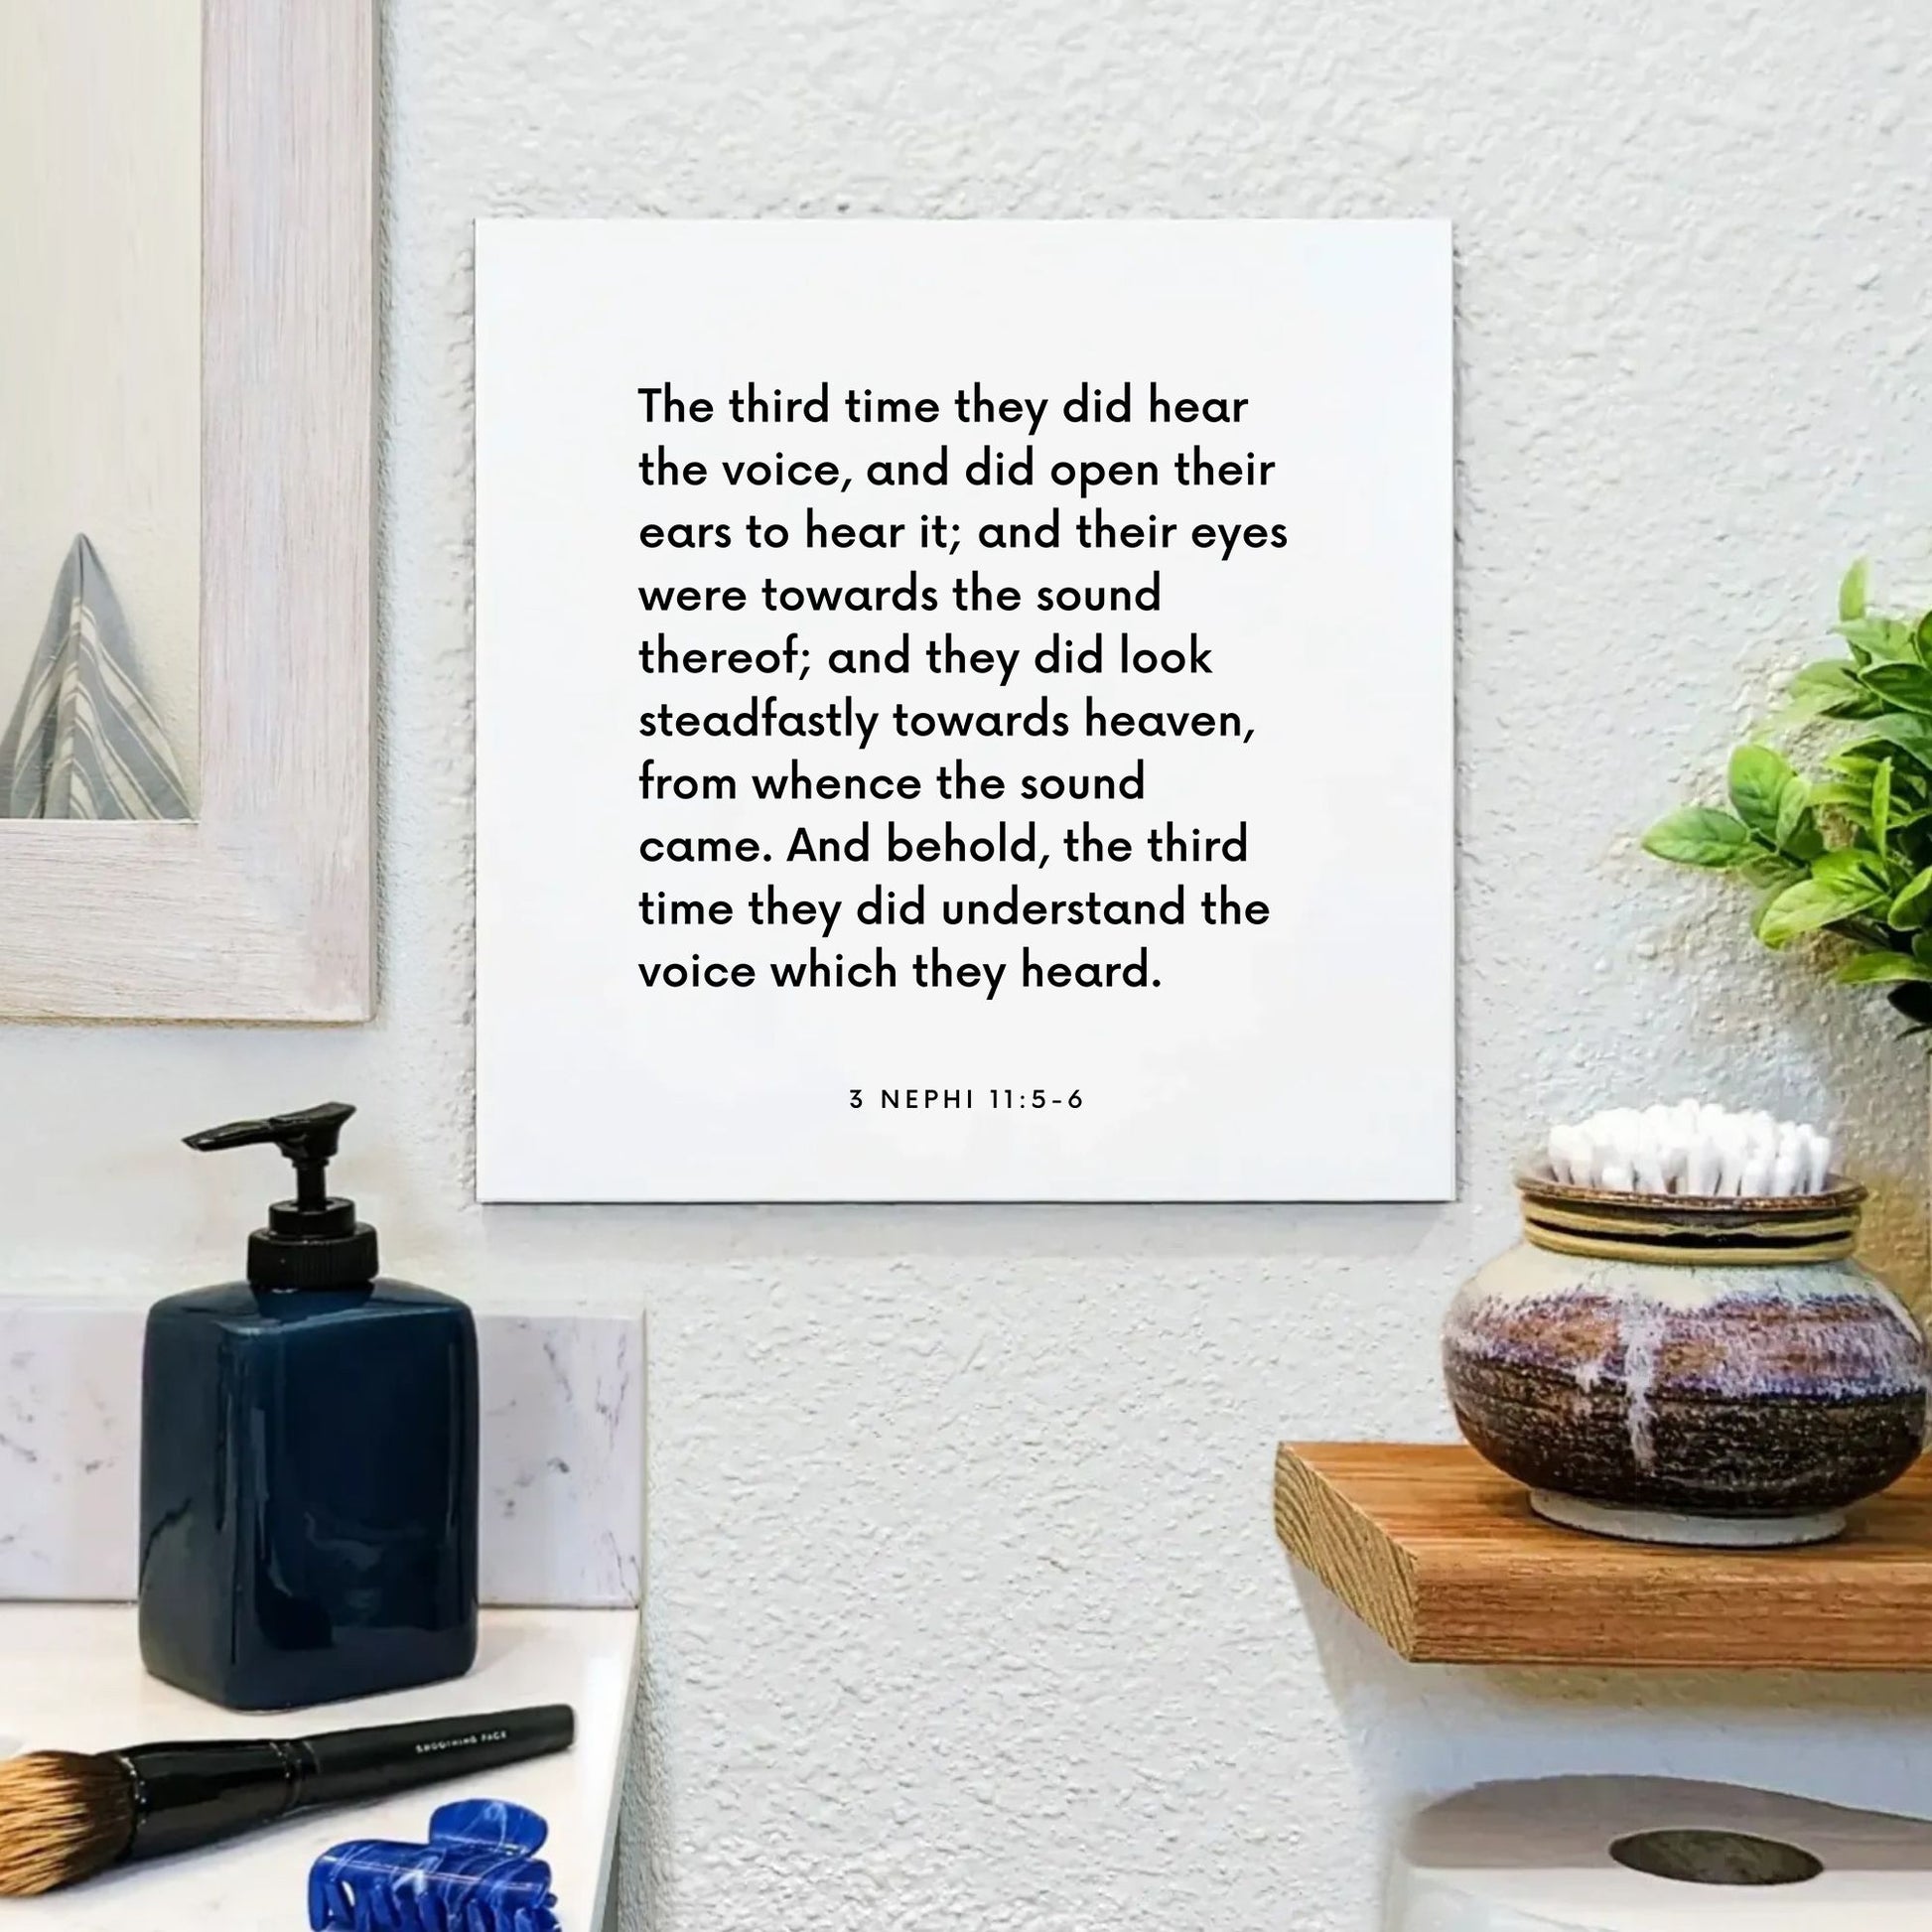 Bathroom mouting of the scripture tile for 3 Nephi 11:5-6 - "They did understand the voice which they heard"